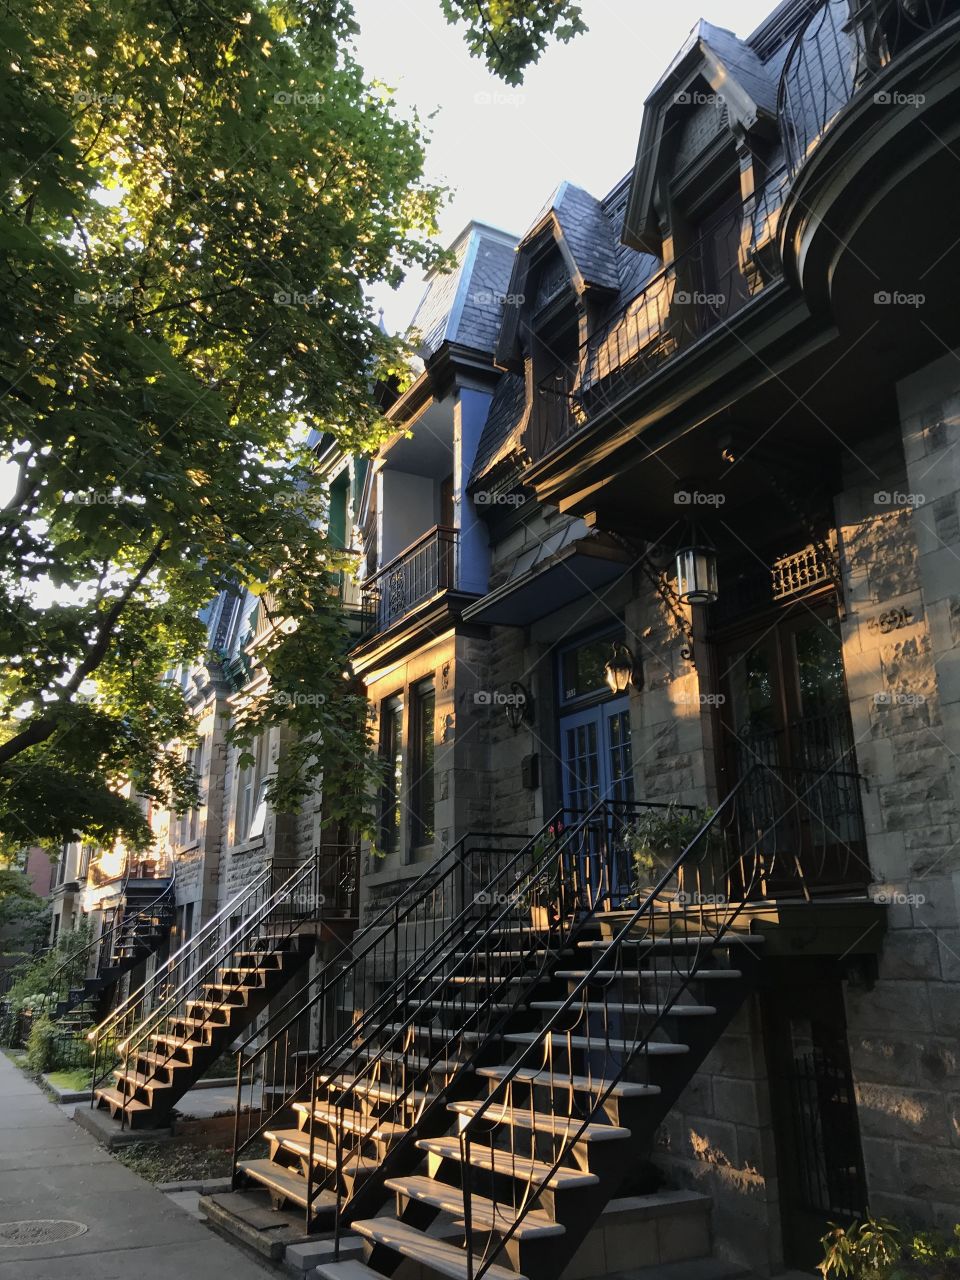 Victorian houses in the Plateau neighborhood of Montréal in the evening sunlight